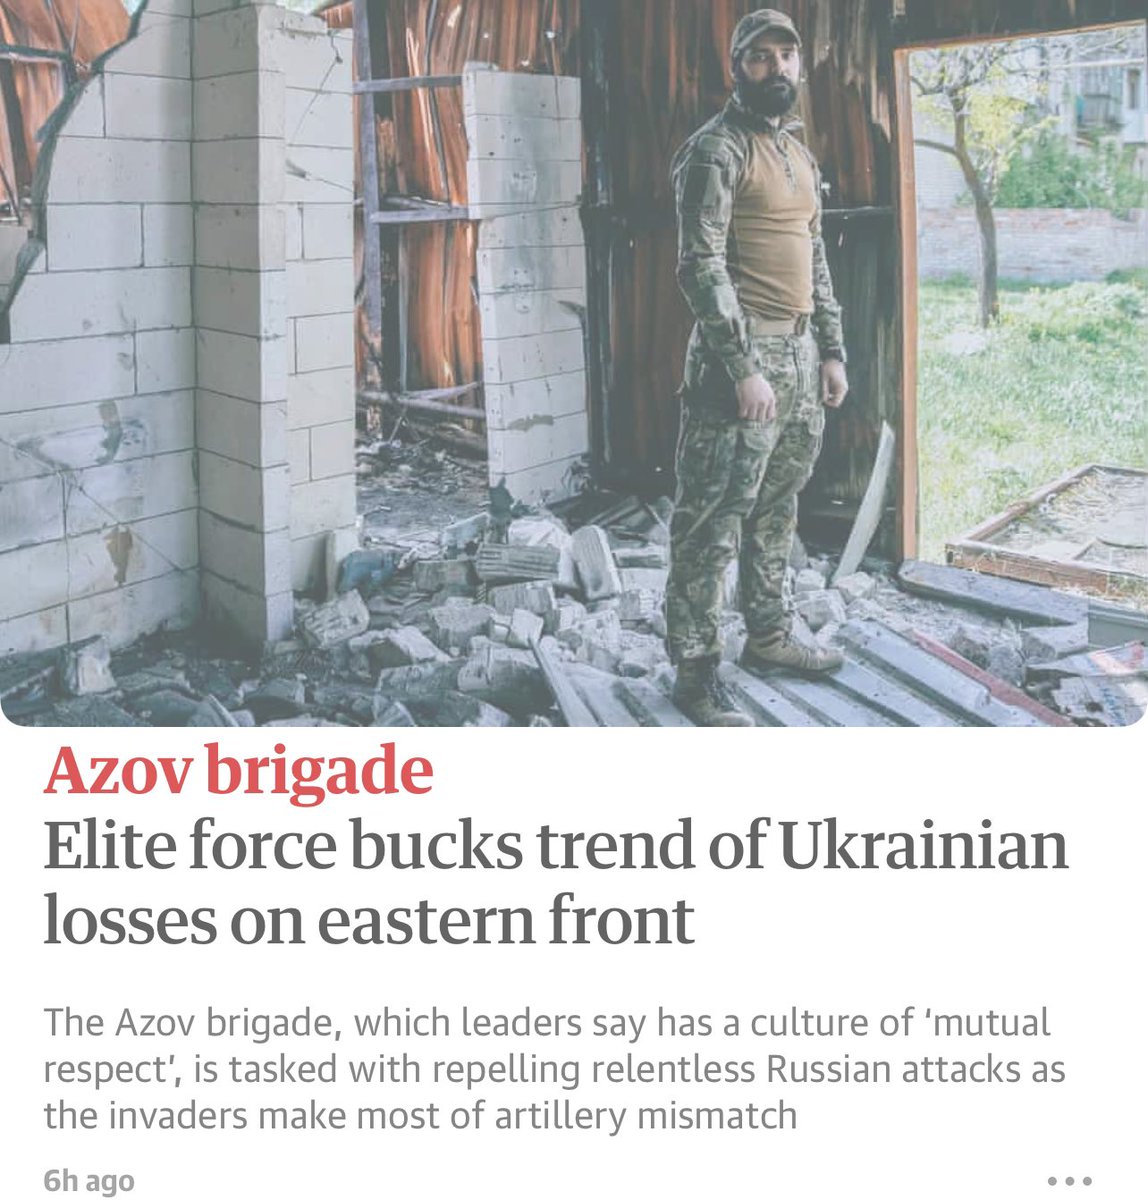 The “liberal” Guardian whitewashing Ukraine’s openly Nazi Azov brigade. Read the reality in our reporting. Including how their multiple Western backers include Israel: electronicintifada.net/tags/azov-batt…